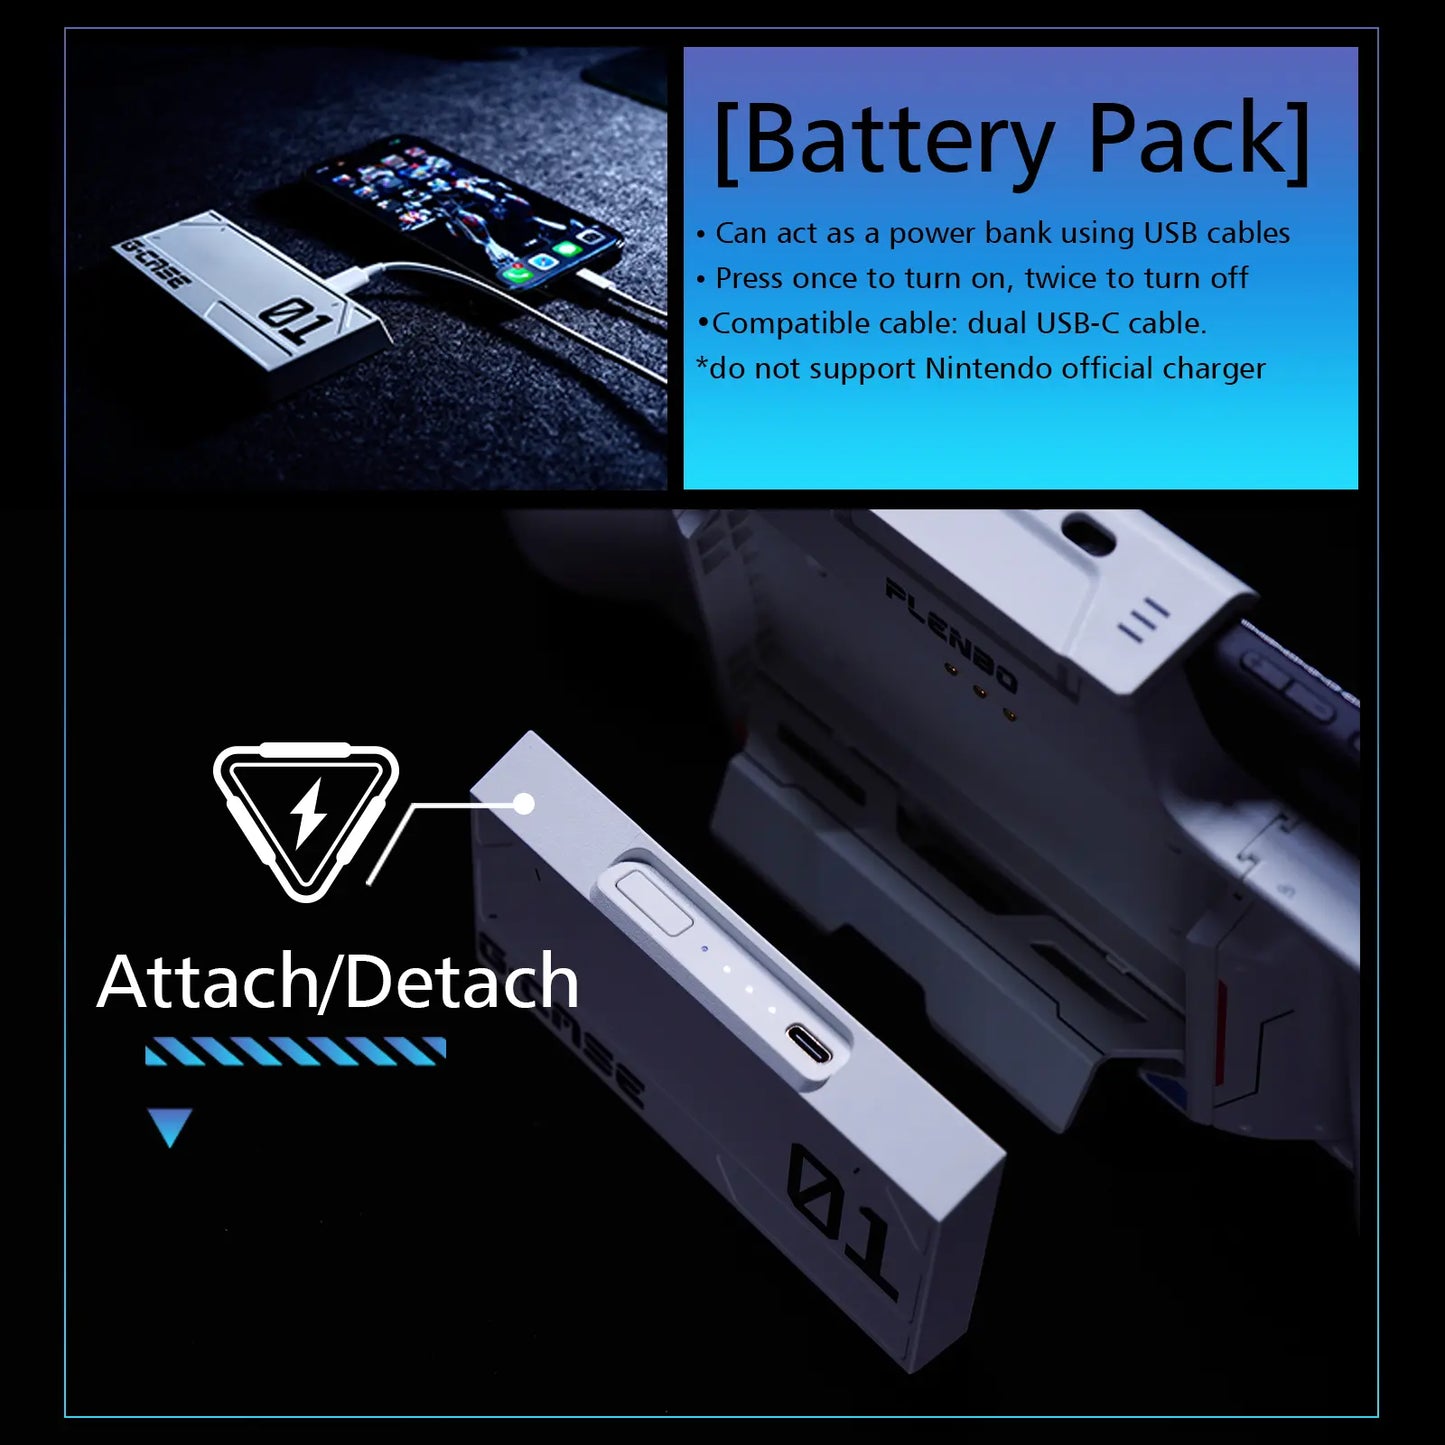 features of the battery pack